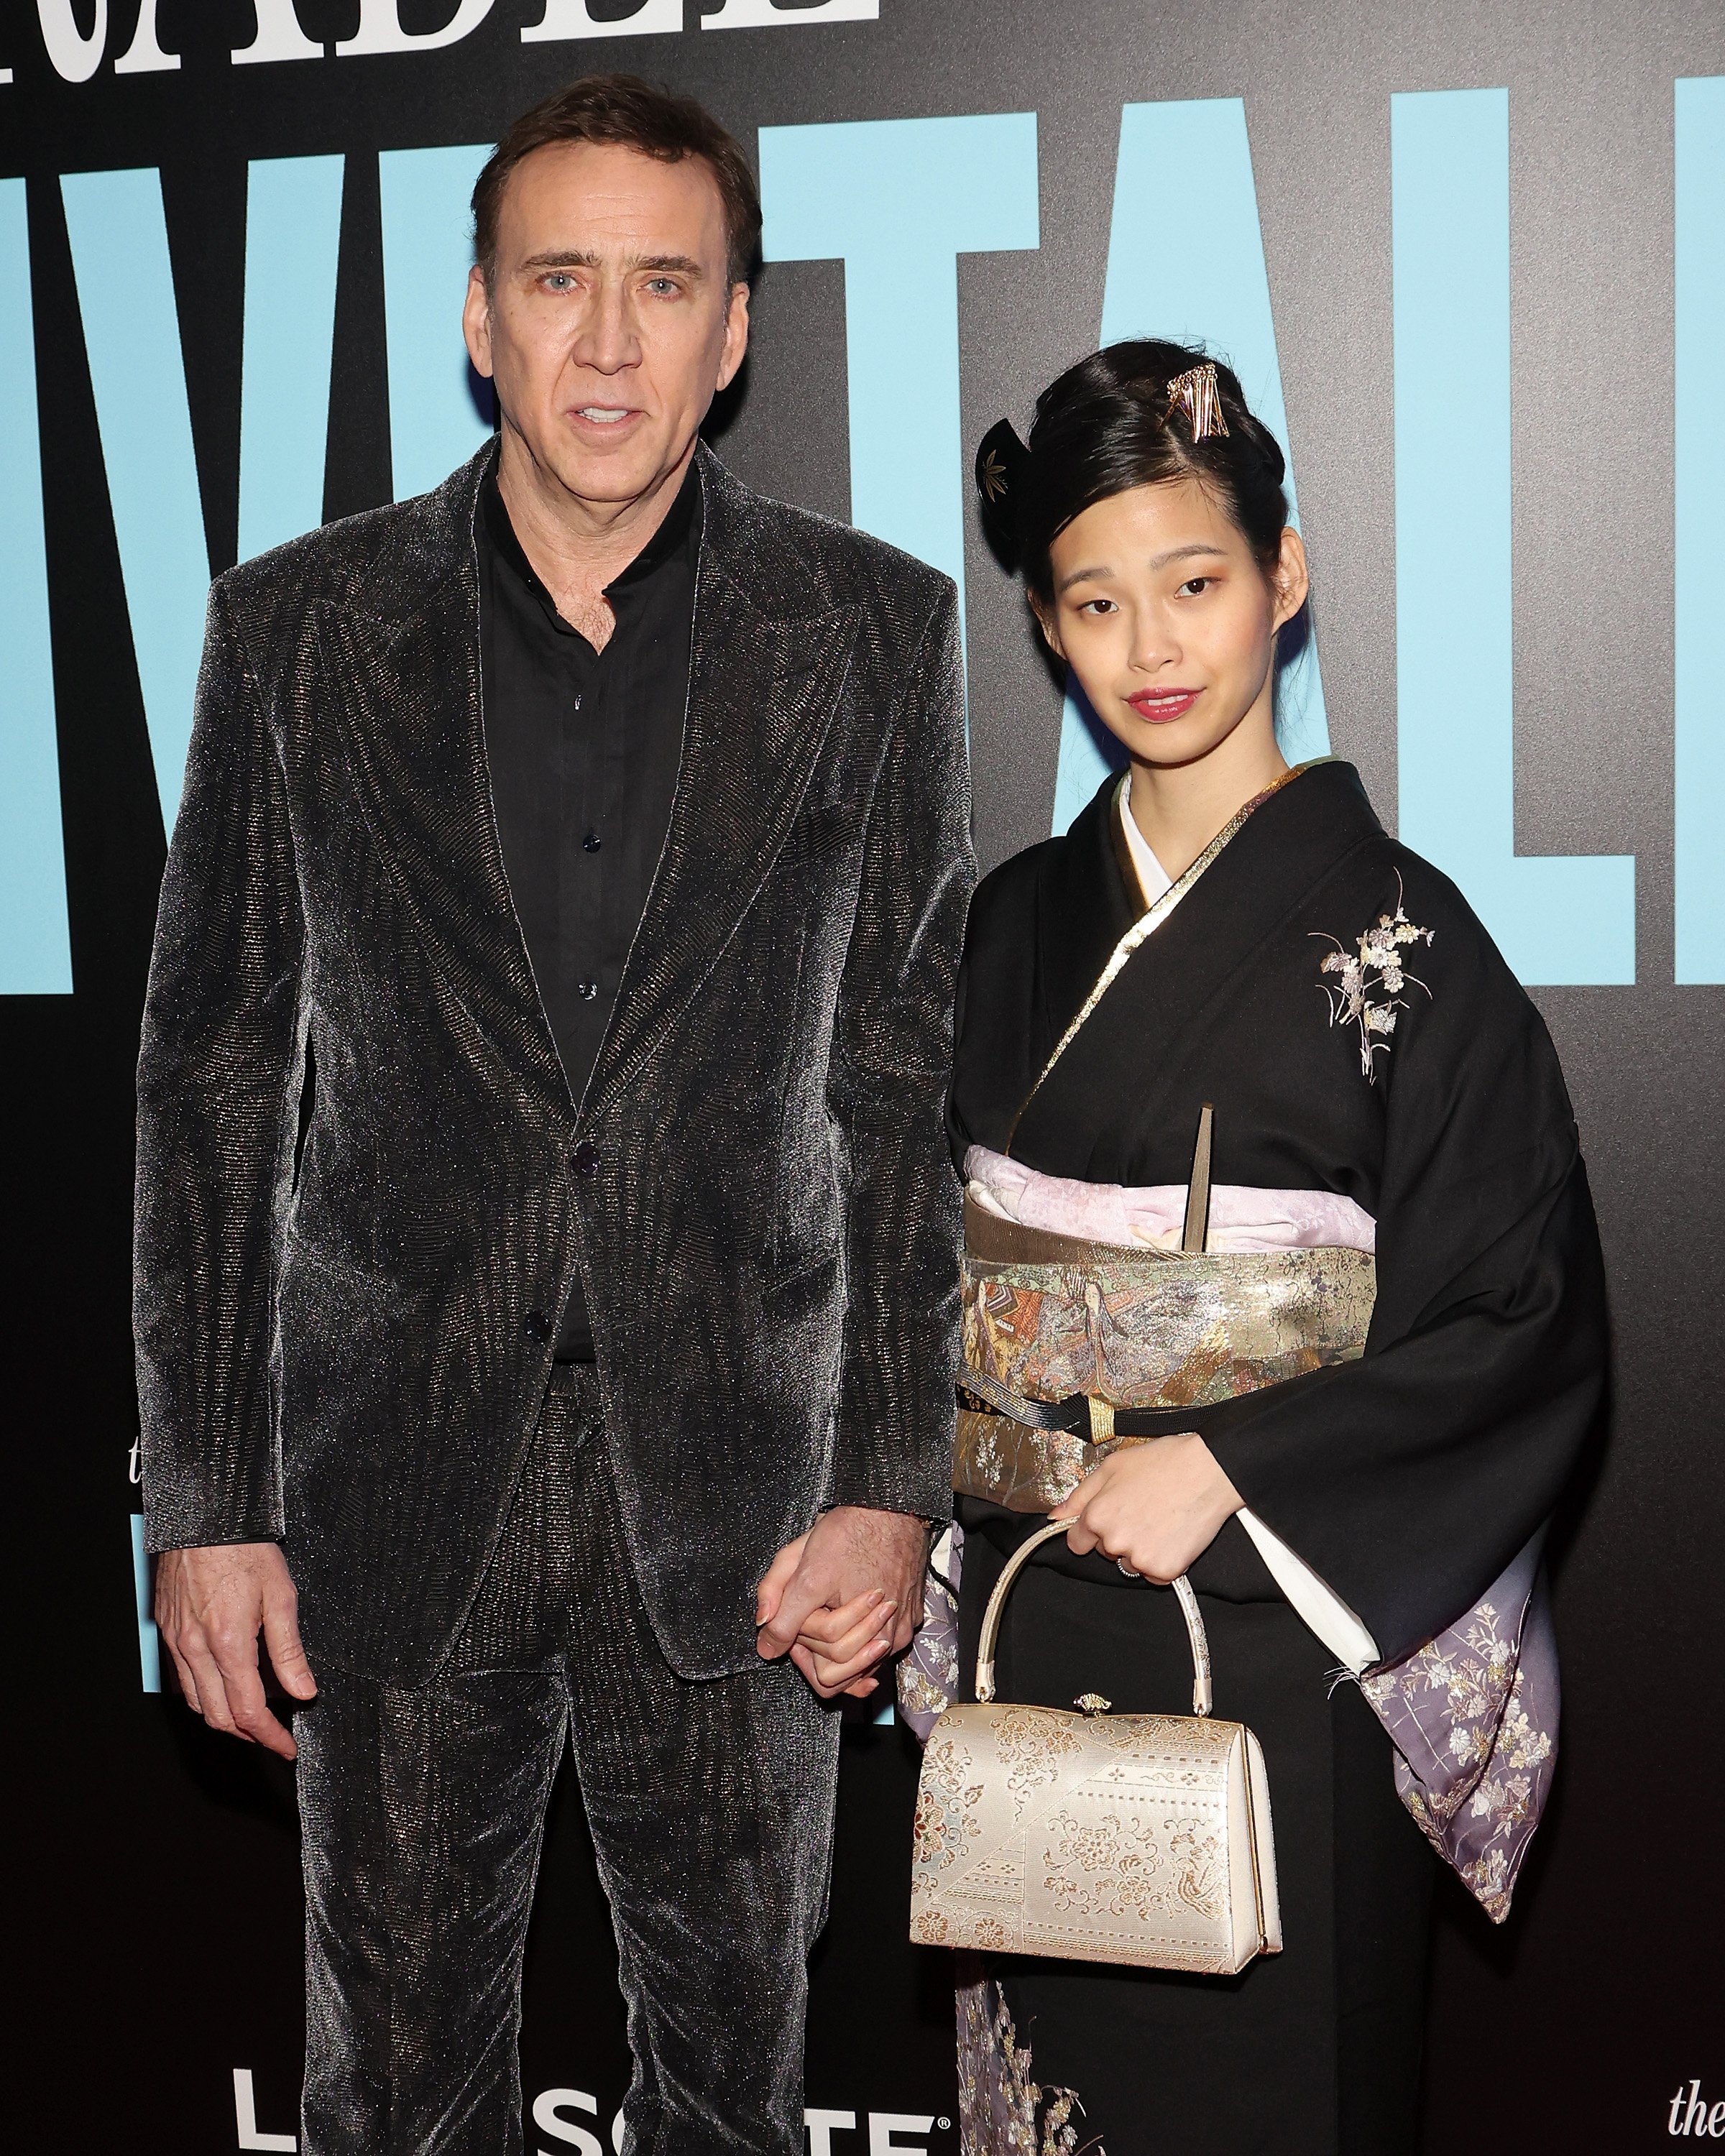 Nicolas Cage and Riko Shibata attend the New York premiere of "The Unbearable Weight of Massive Talent" at Regal Essex Crossing on April 10, 2022 in New York City. | Source: Getty Images